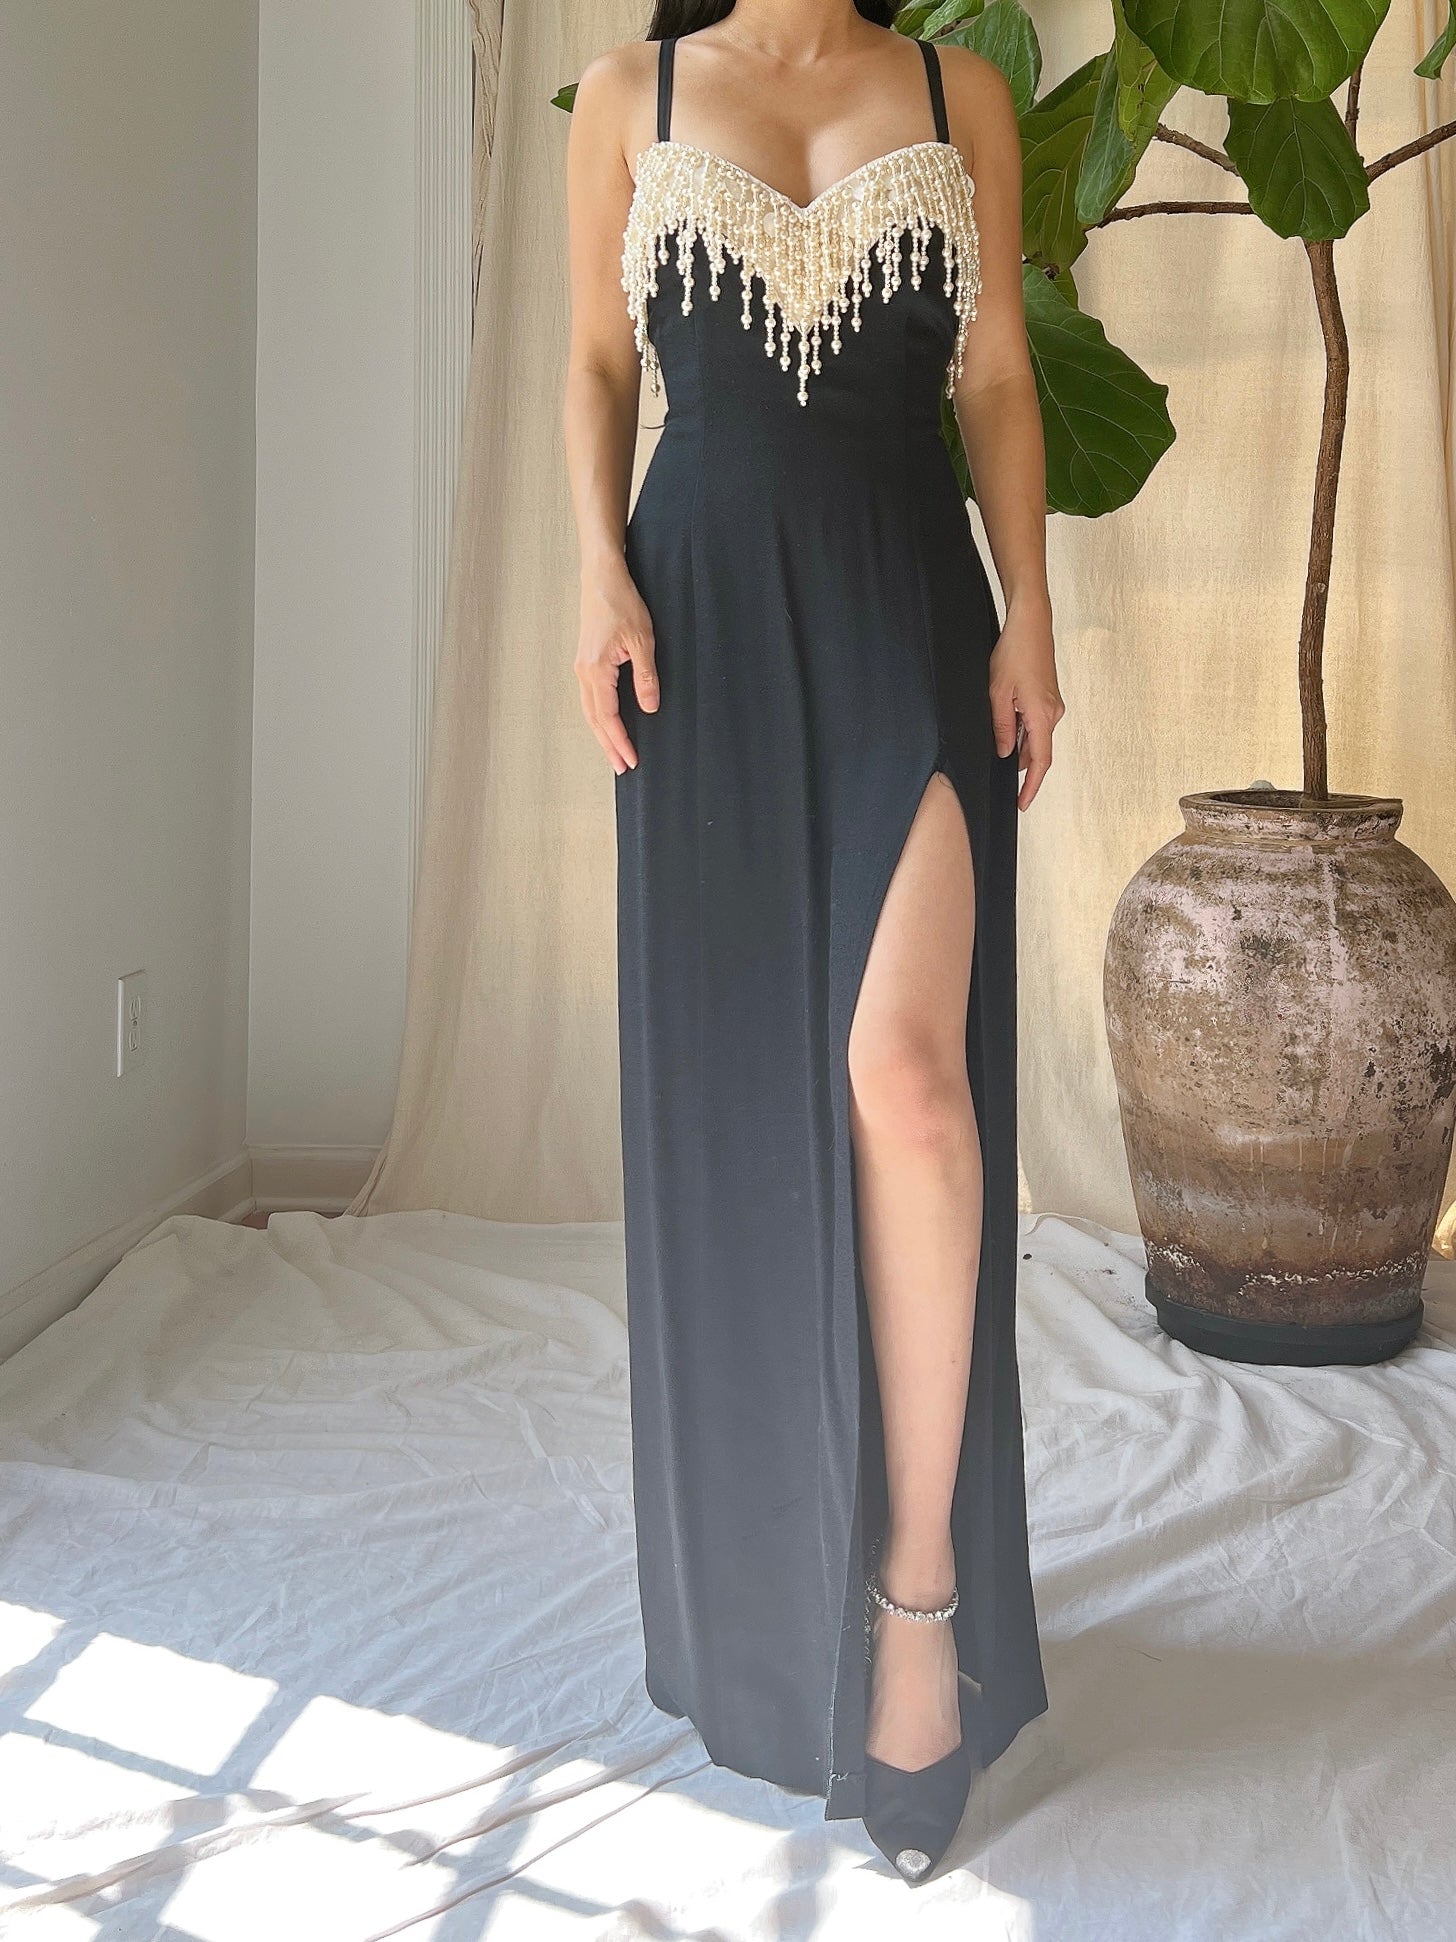 Vintage Rayon Pearl Tassel Bodice Gown - M